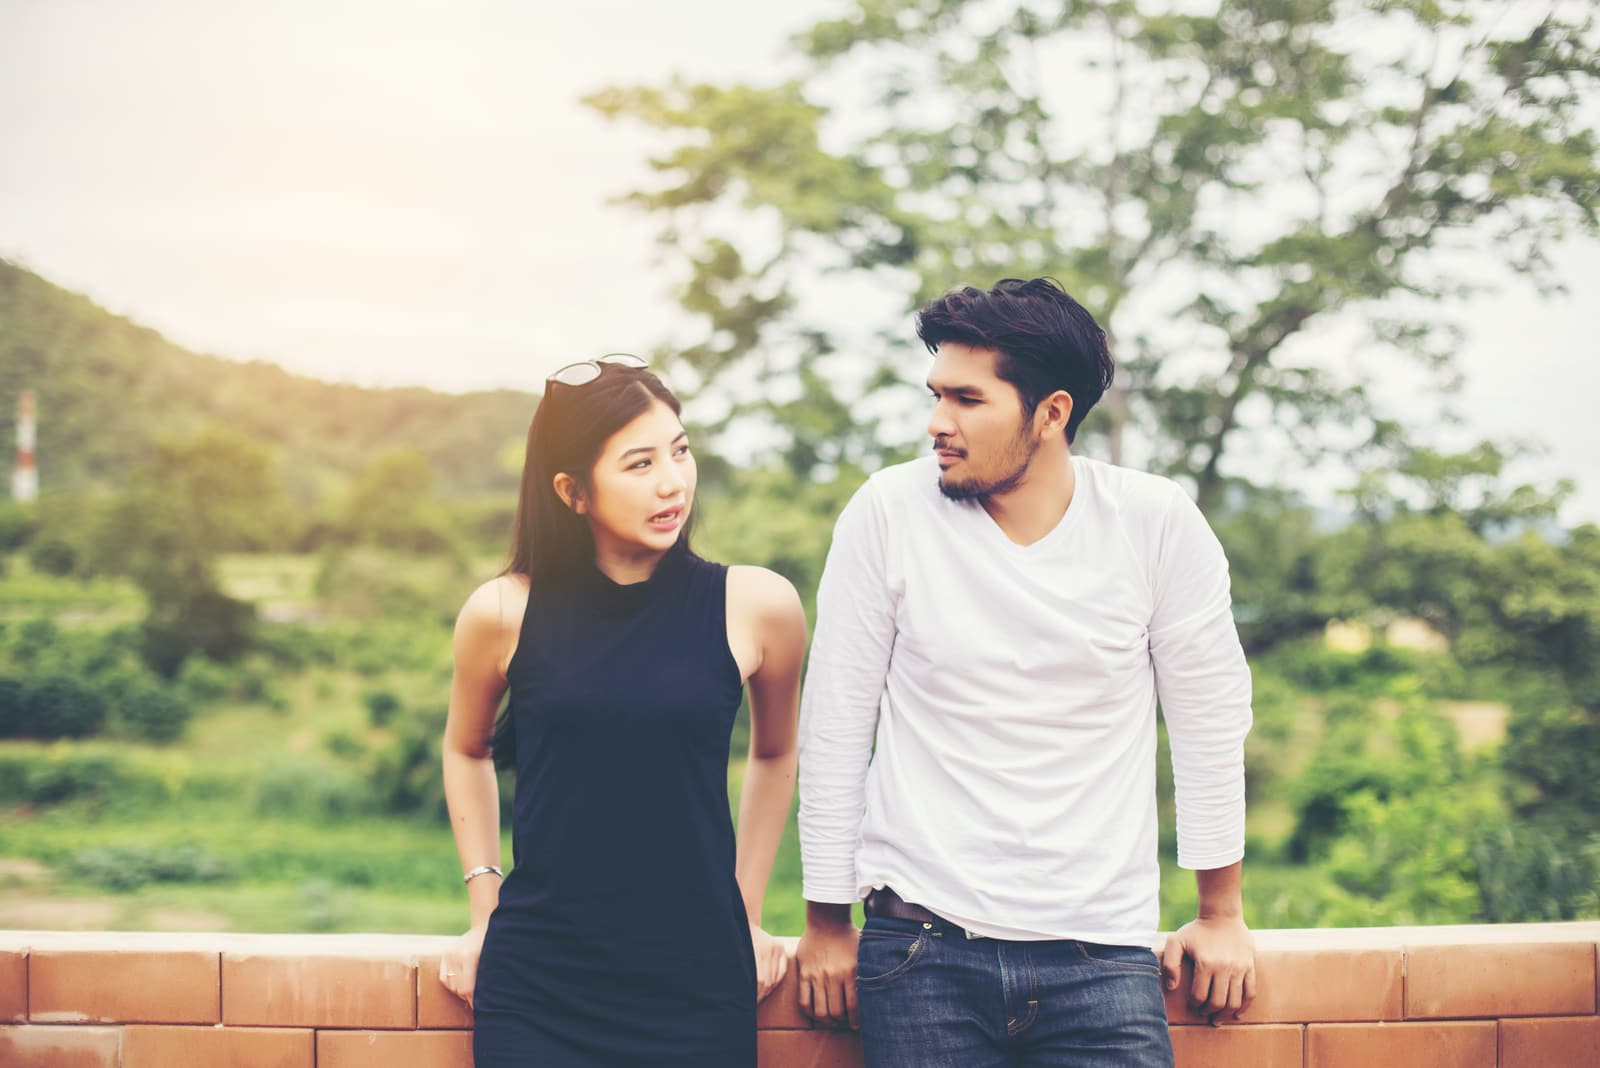 6 Shady Reasons Why Your Narcissistic Ex Wants To Stay Friends With You